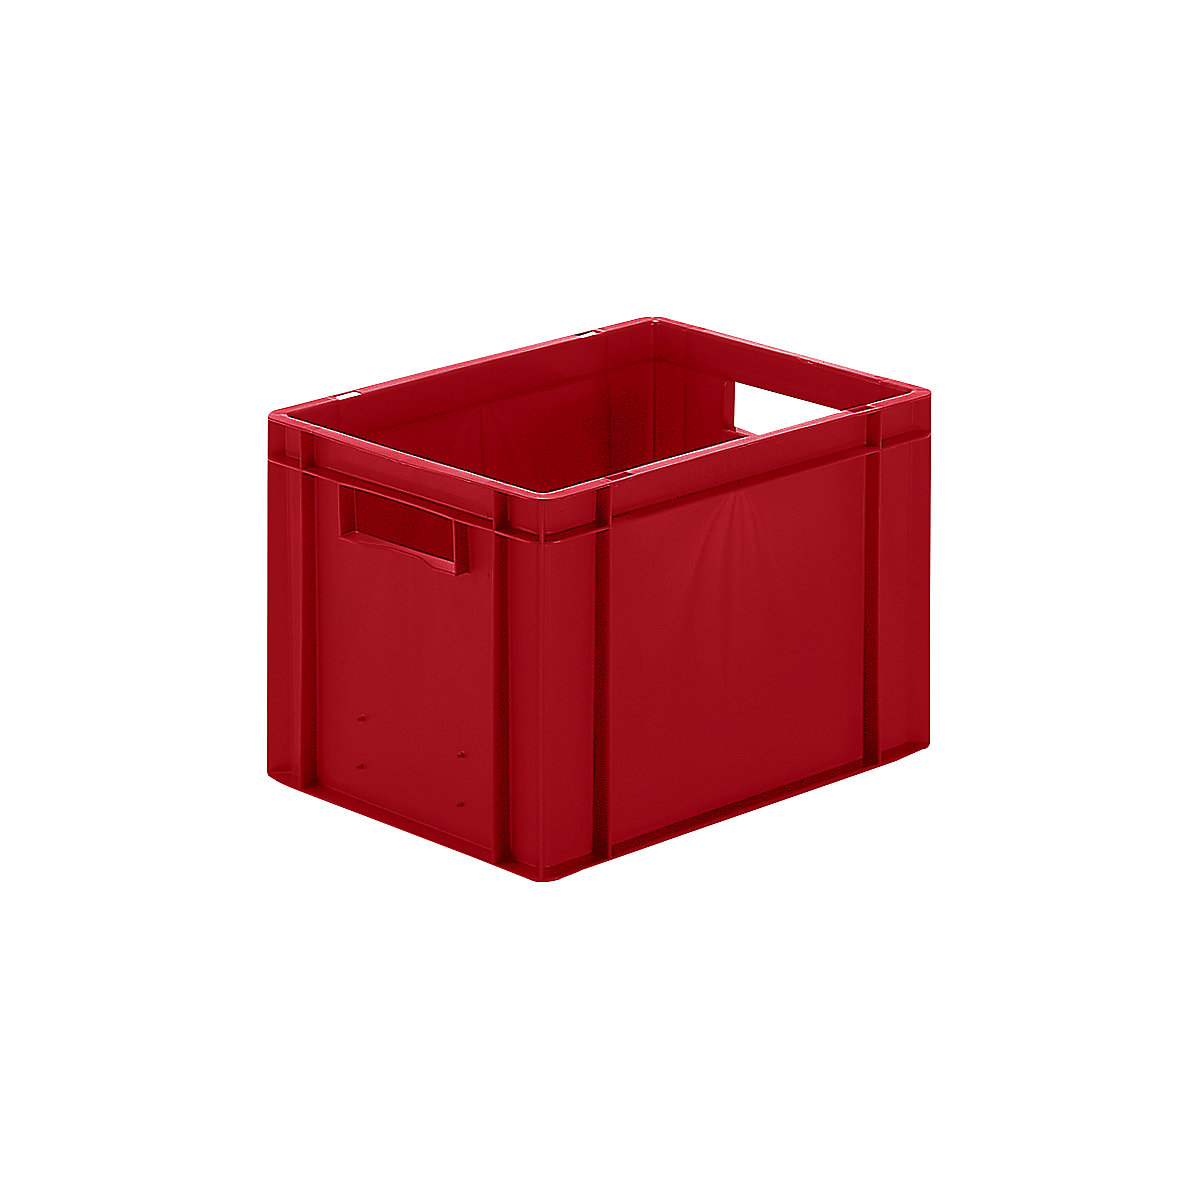 Euro stacking container, closed walls and base, LxWxH 400 x 300 x 270 mm, red, pack of 5-7